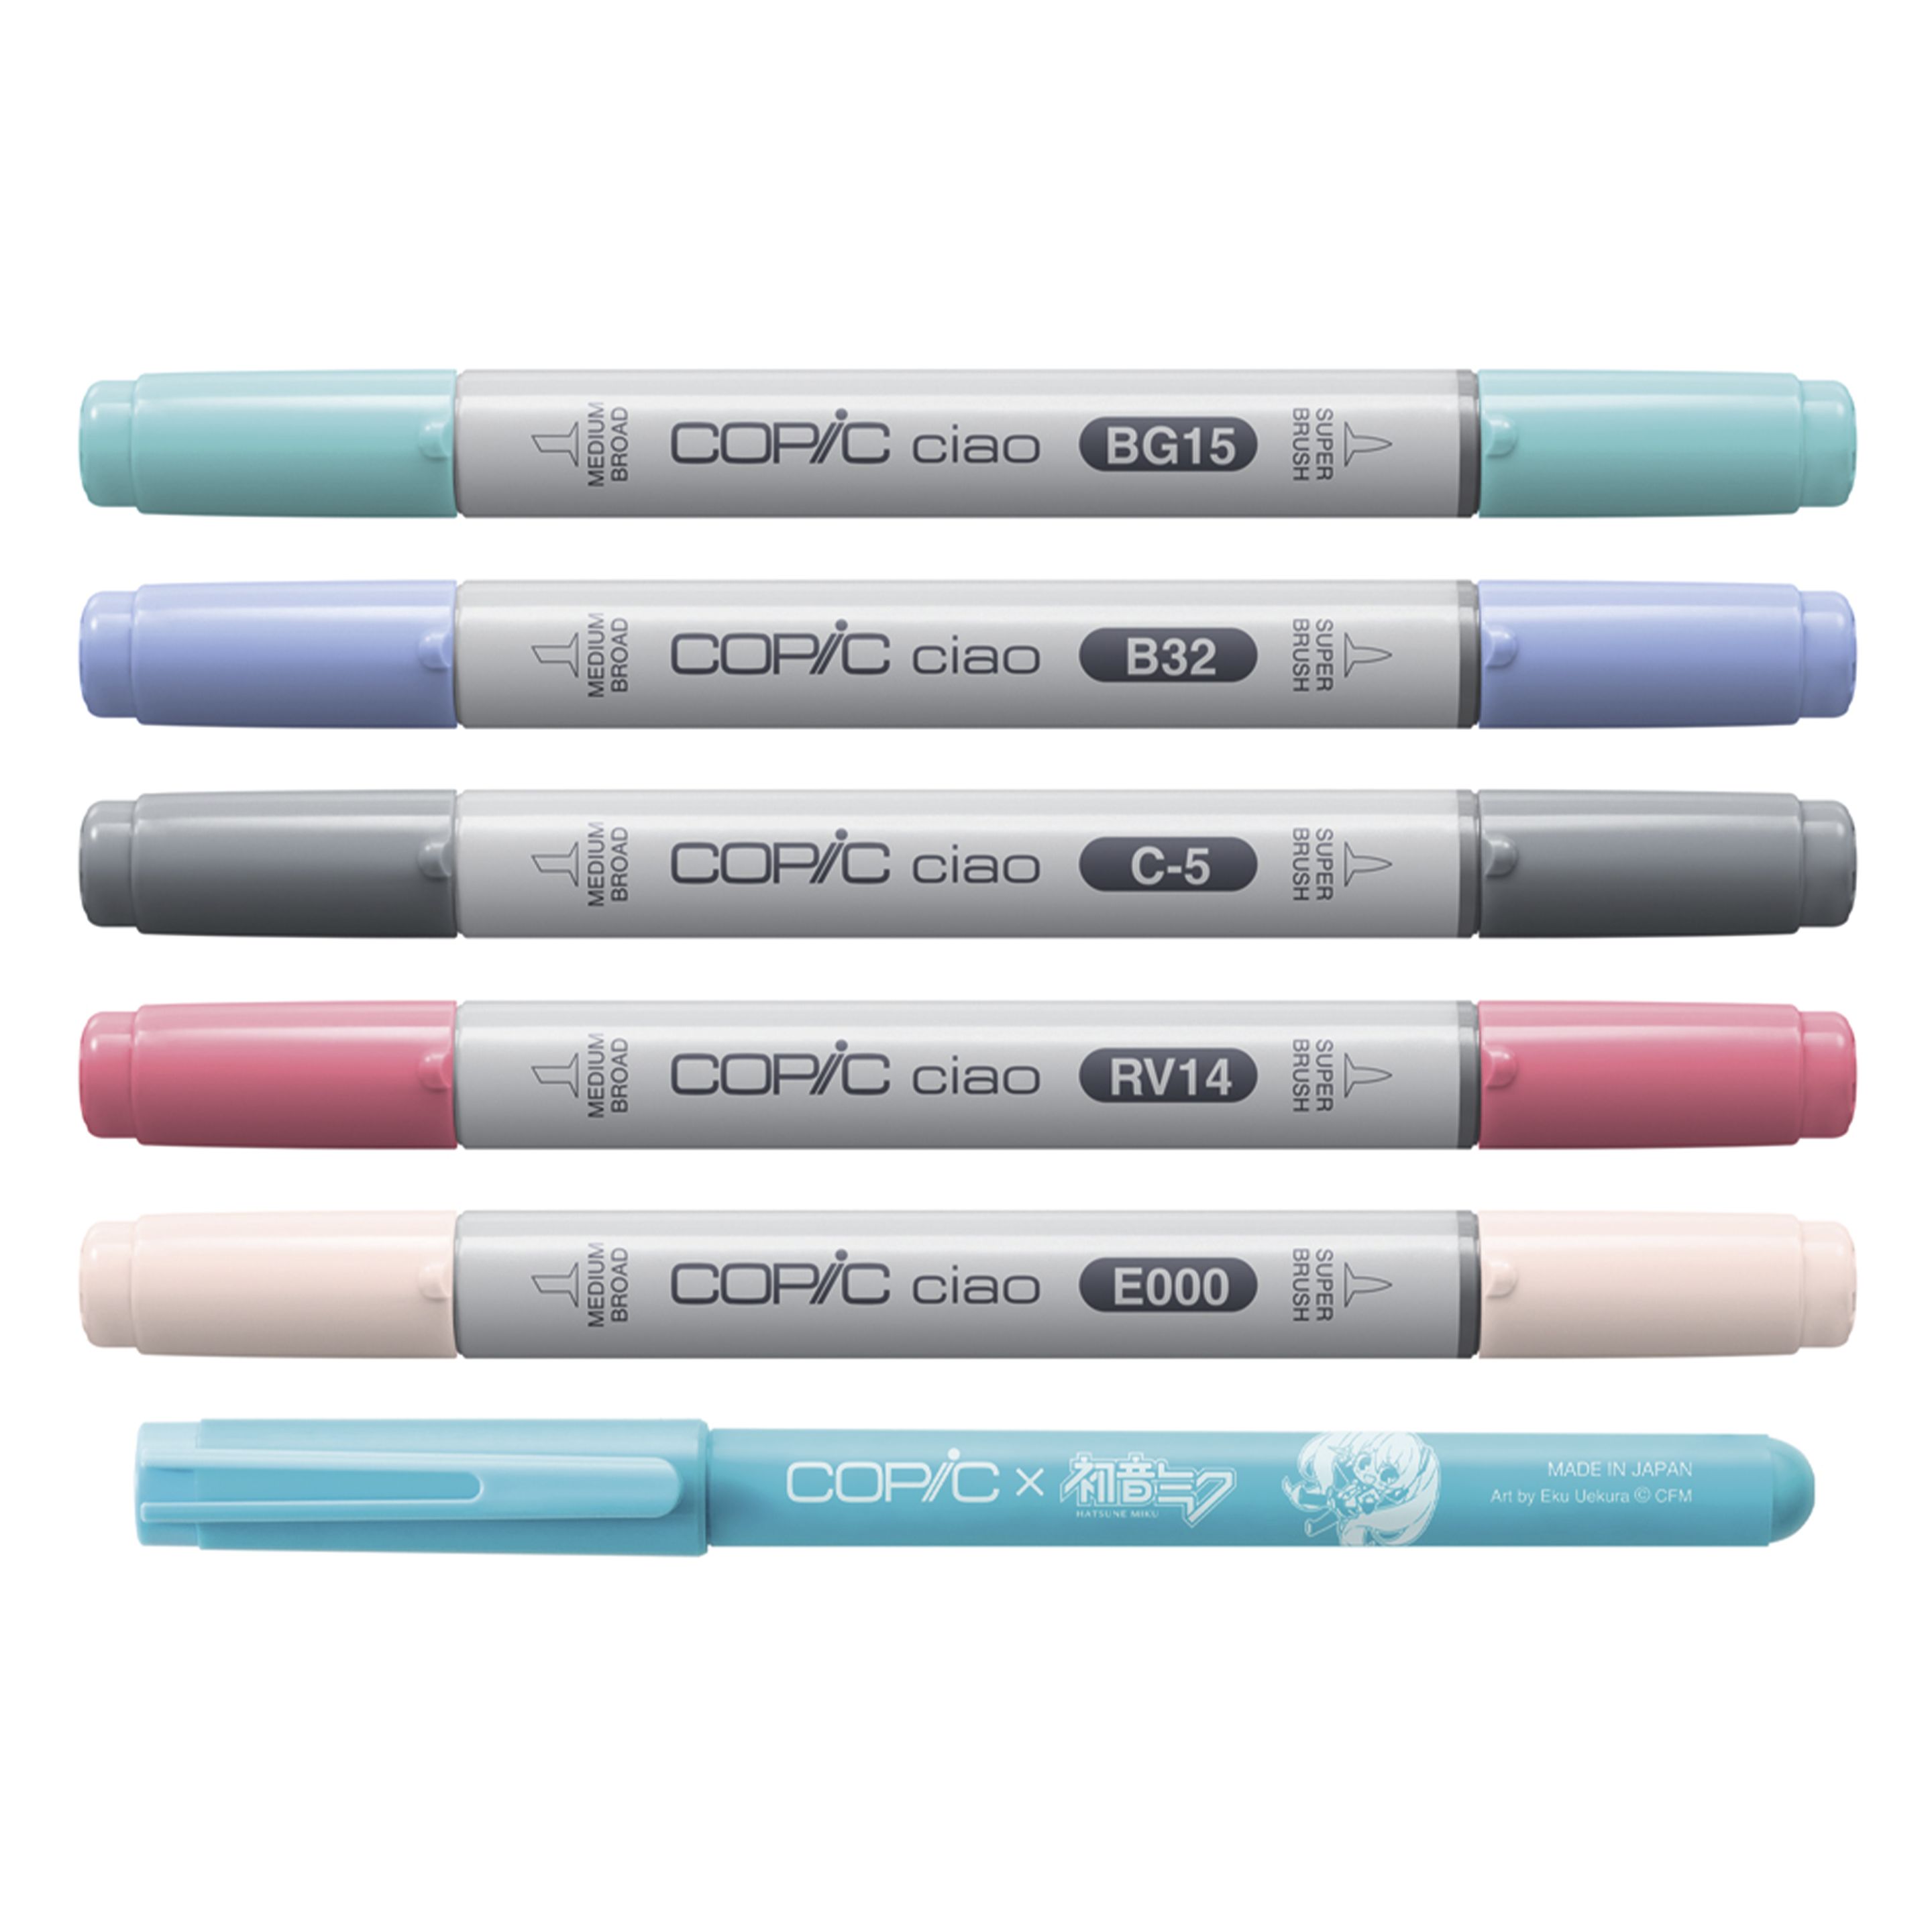 Copic Ciao Hatsune Miku Set Limited Edition enthält 5 Copic CIao und 1 Multiliner